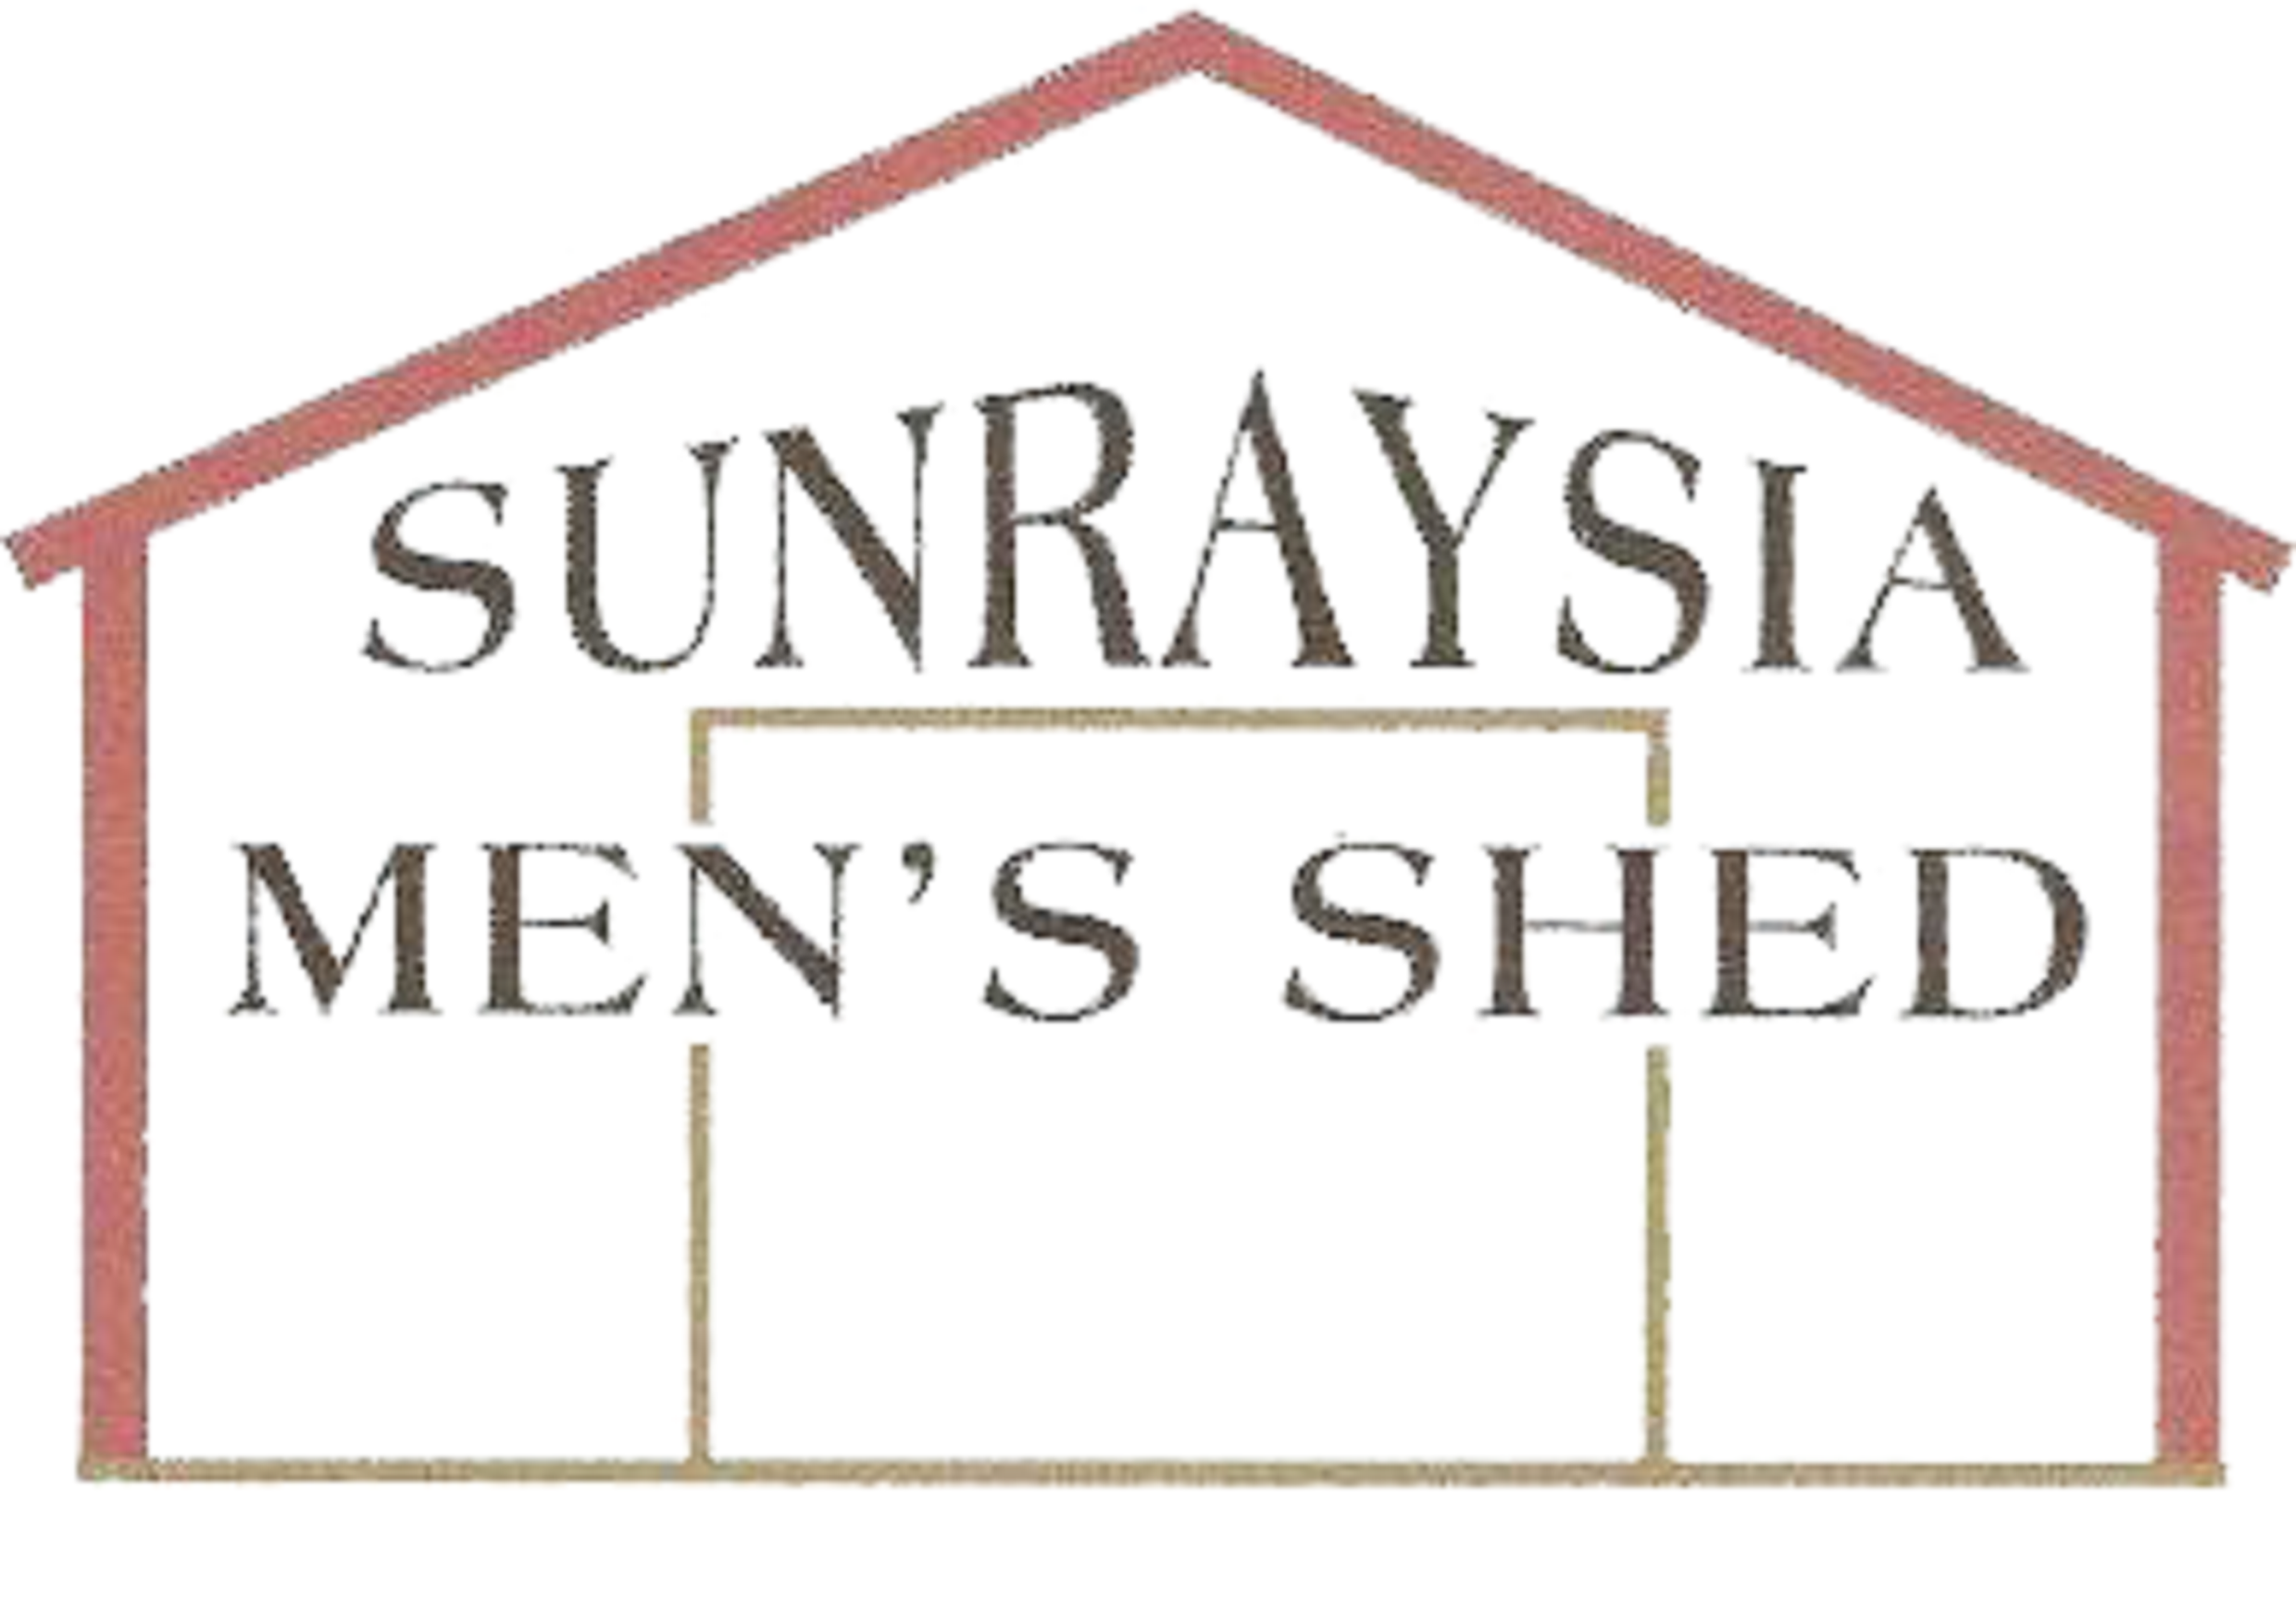 Sunraysia Men's Shed